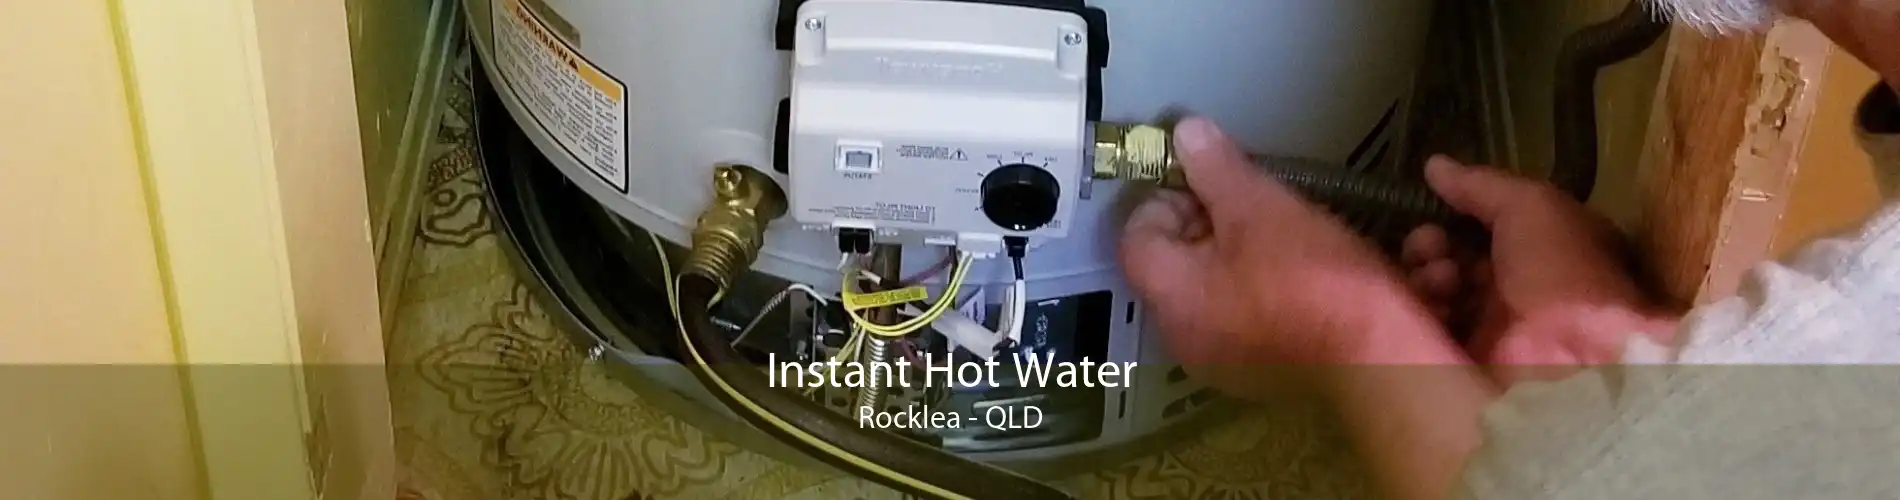 Instant Hot Water Rocklea - QLD